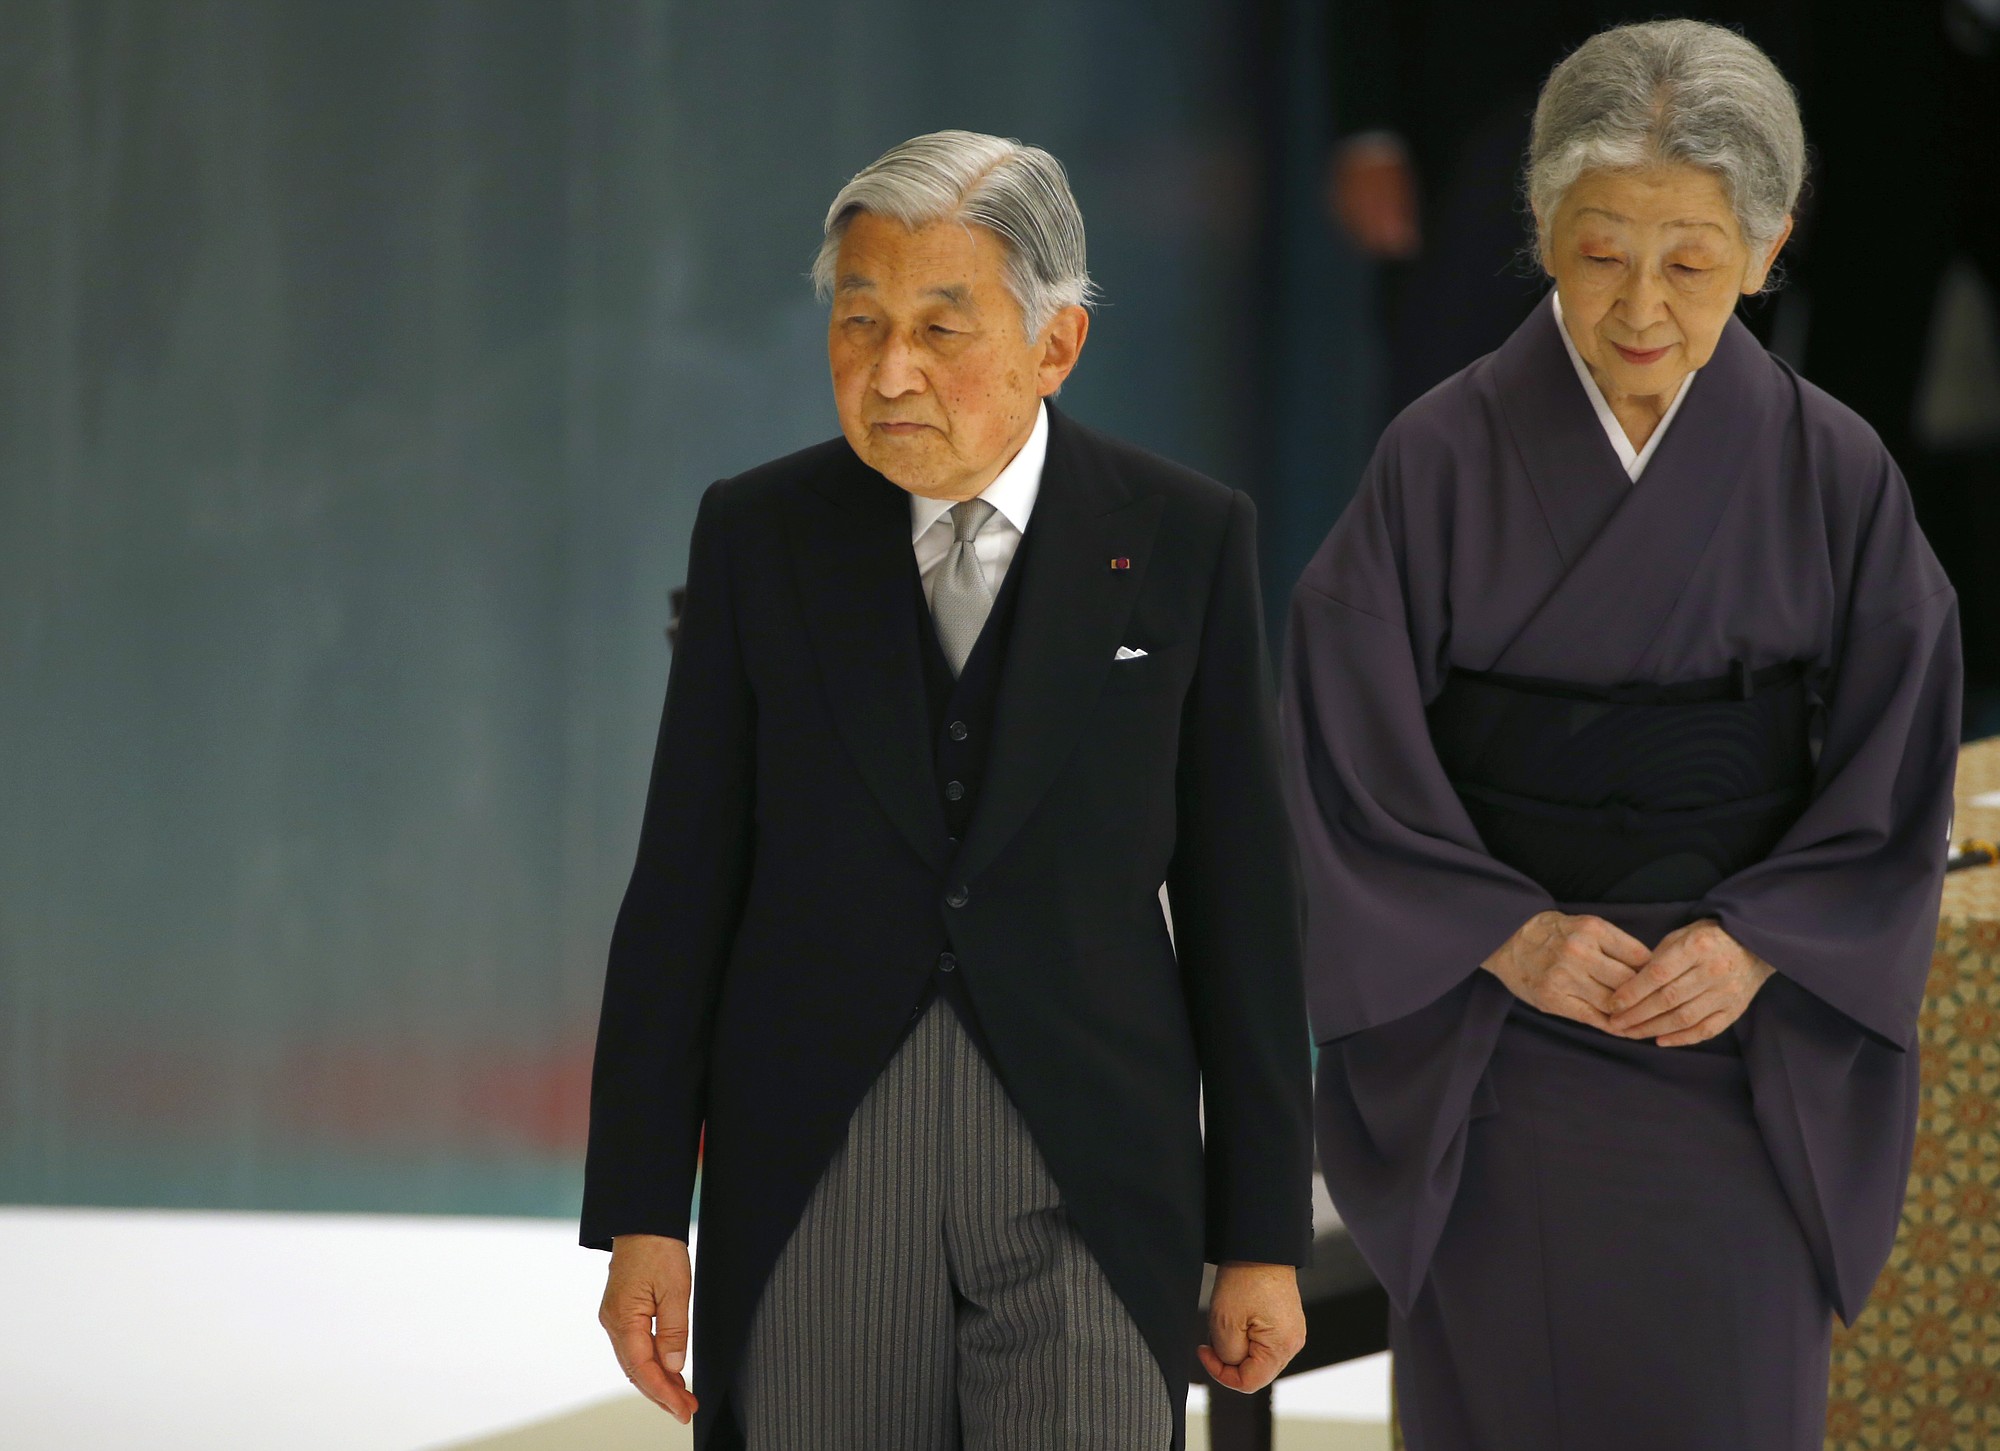 Emperor Akihito changed the word 'sorrow' to 'remorse' in his annual speech on the anniversary of Japan's surrender during World War II.